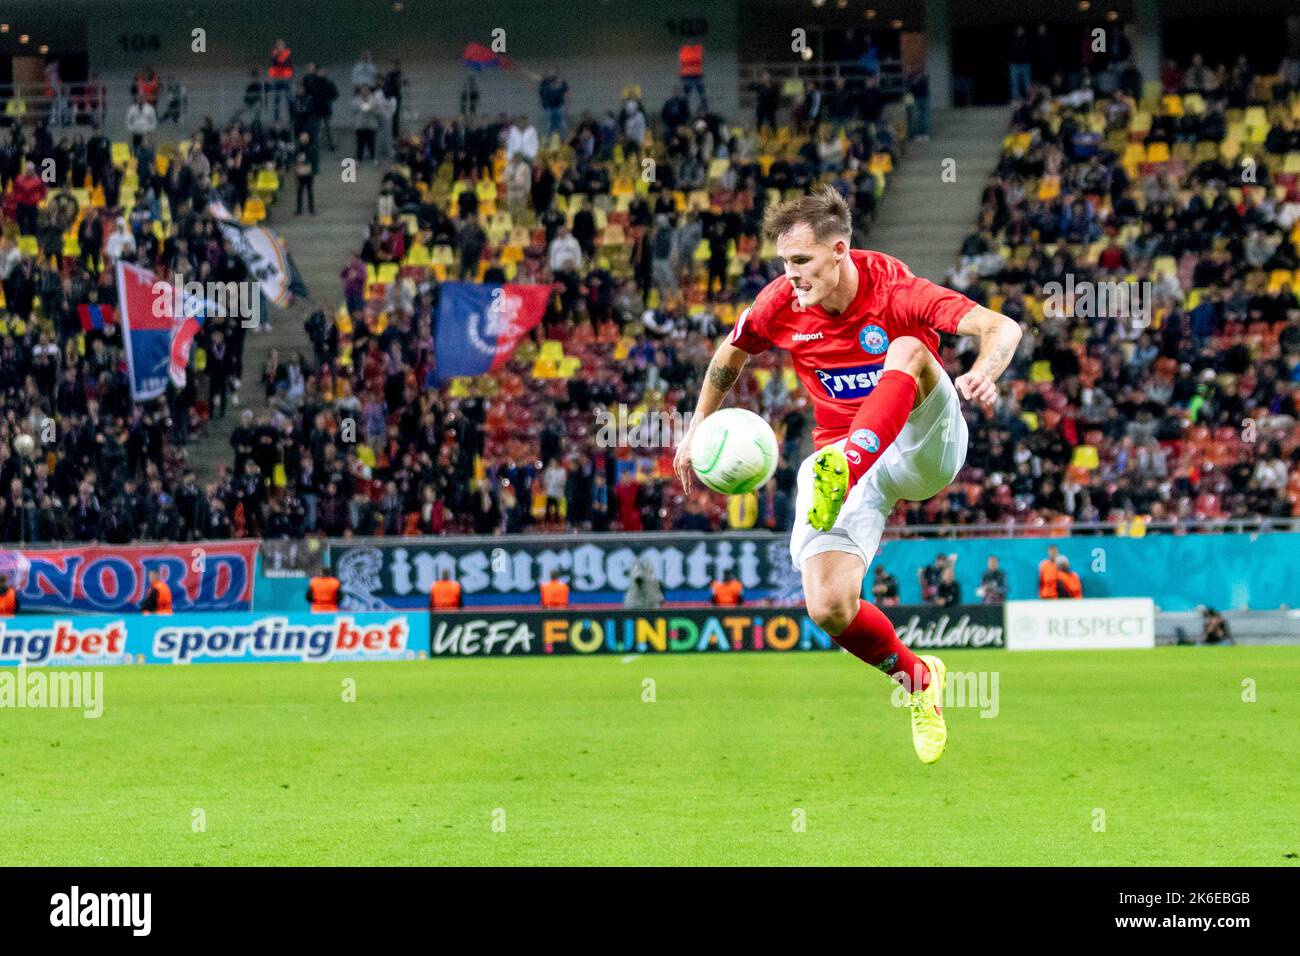 Bucharest, Romania. 14th Oct, 2022. October 14, 2022: Lukas Engel #29 of Silkeborg IF during of the UEFA Europa Conference League group B match between FCSB Bucharest and Silkeborg IF at National Arena Stadium in Bucharest, Romania ROU. Catalin Soare/Cronos Credit: Cronos/Alamy Live News Stock Photo